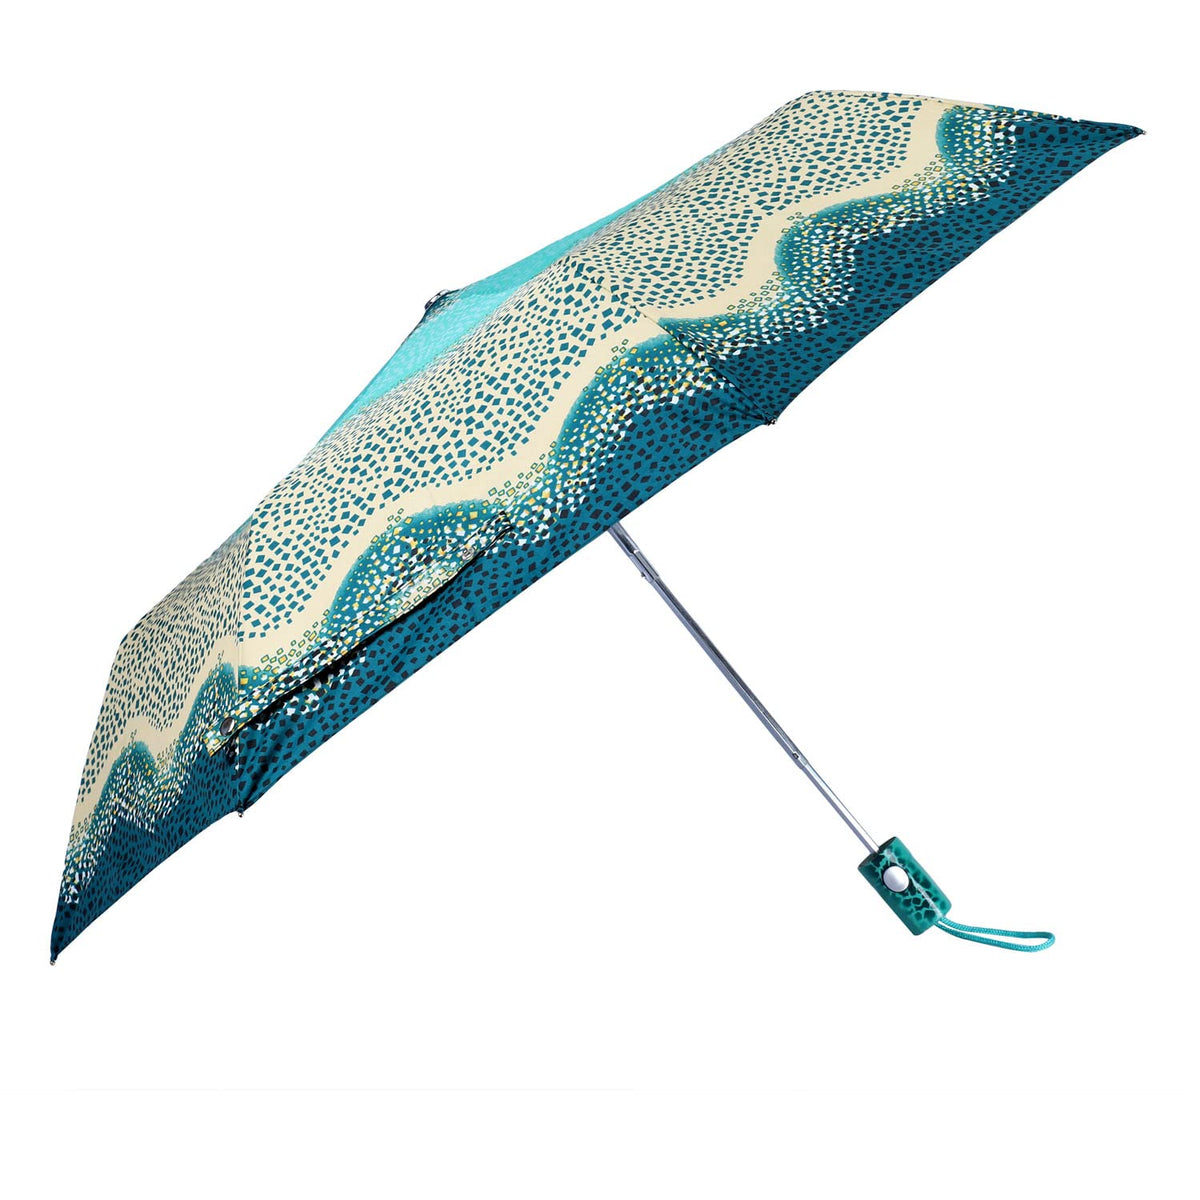 THE CLOWNFISH Umbrella 3 Fold Auto Open Waterproof Pongee Double Coated Silver Lined Umbrellas For Men and Women (Printed Design- Seafoam Green)